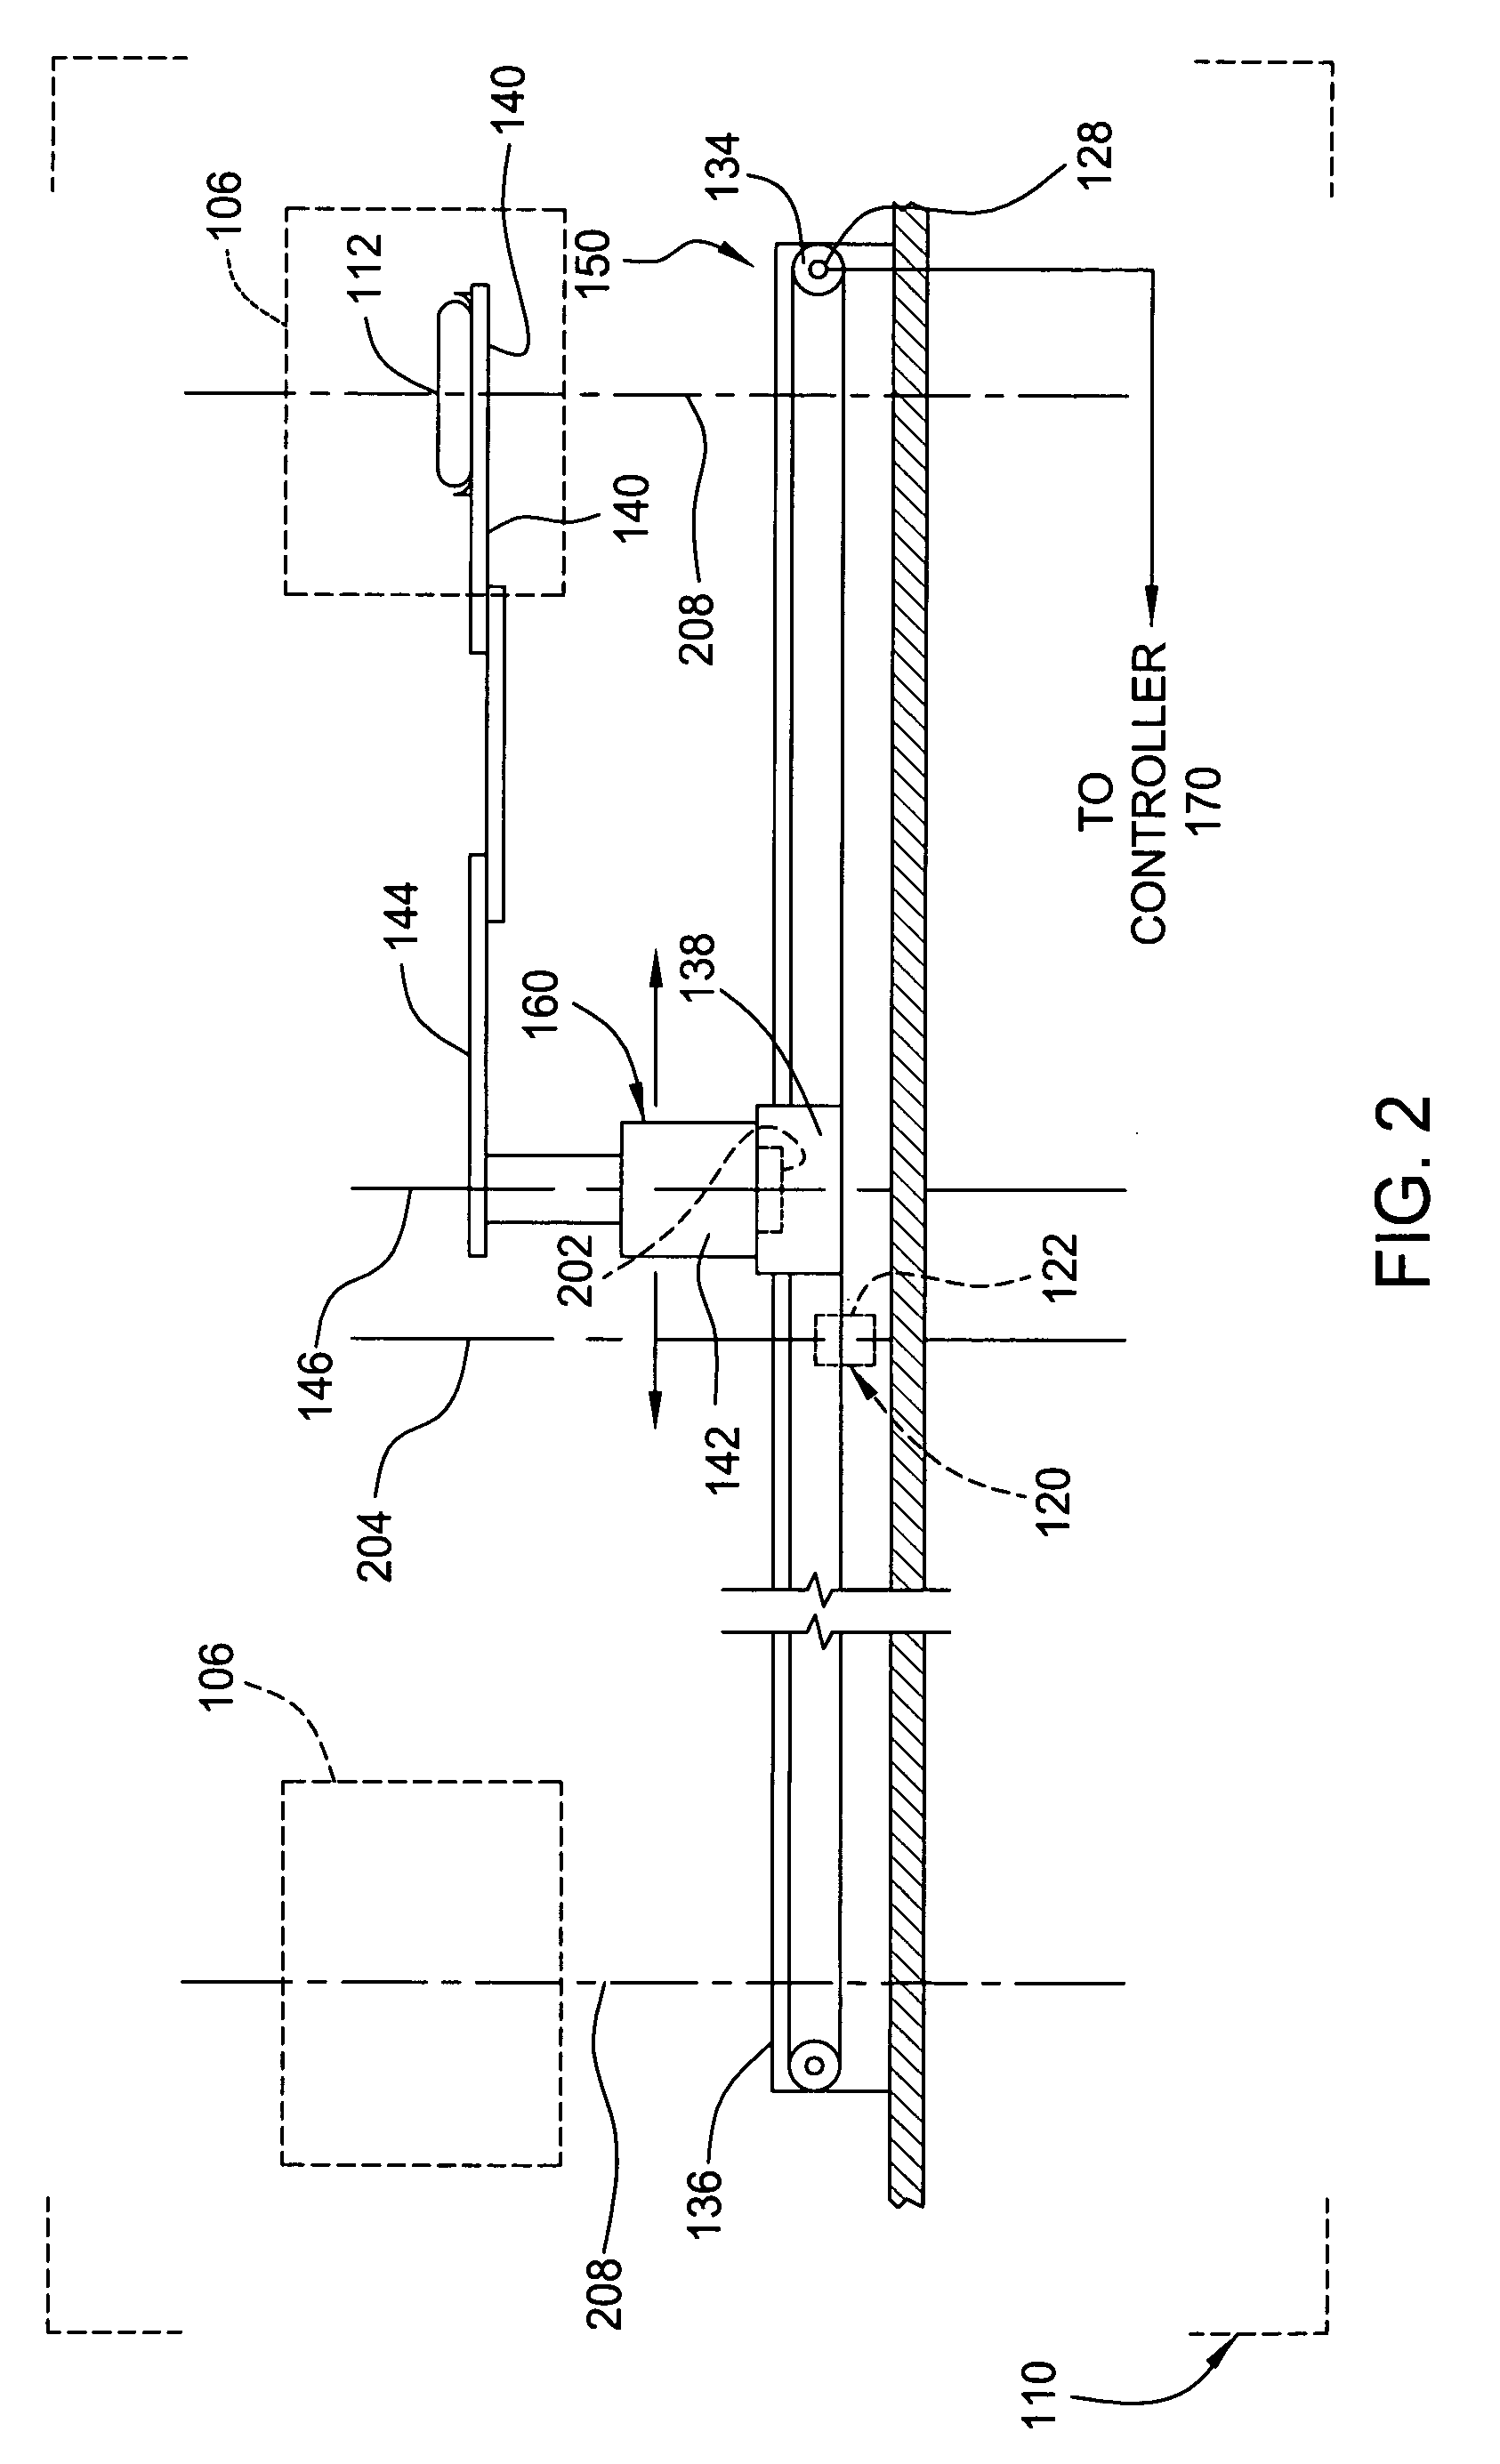 Method and apparatus for monitoring the position of a semiconductor processing robot